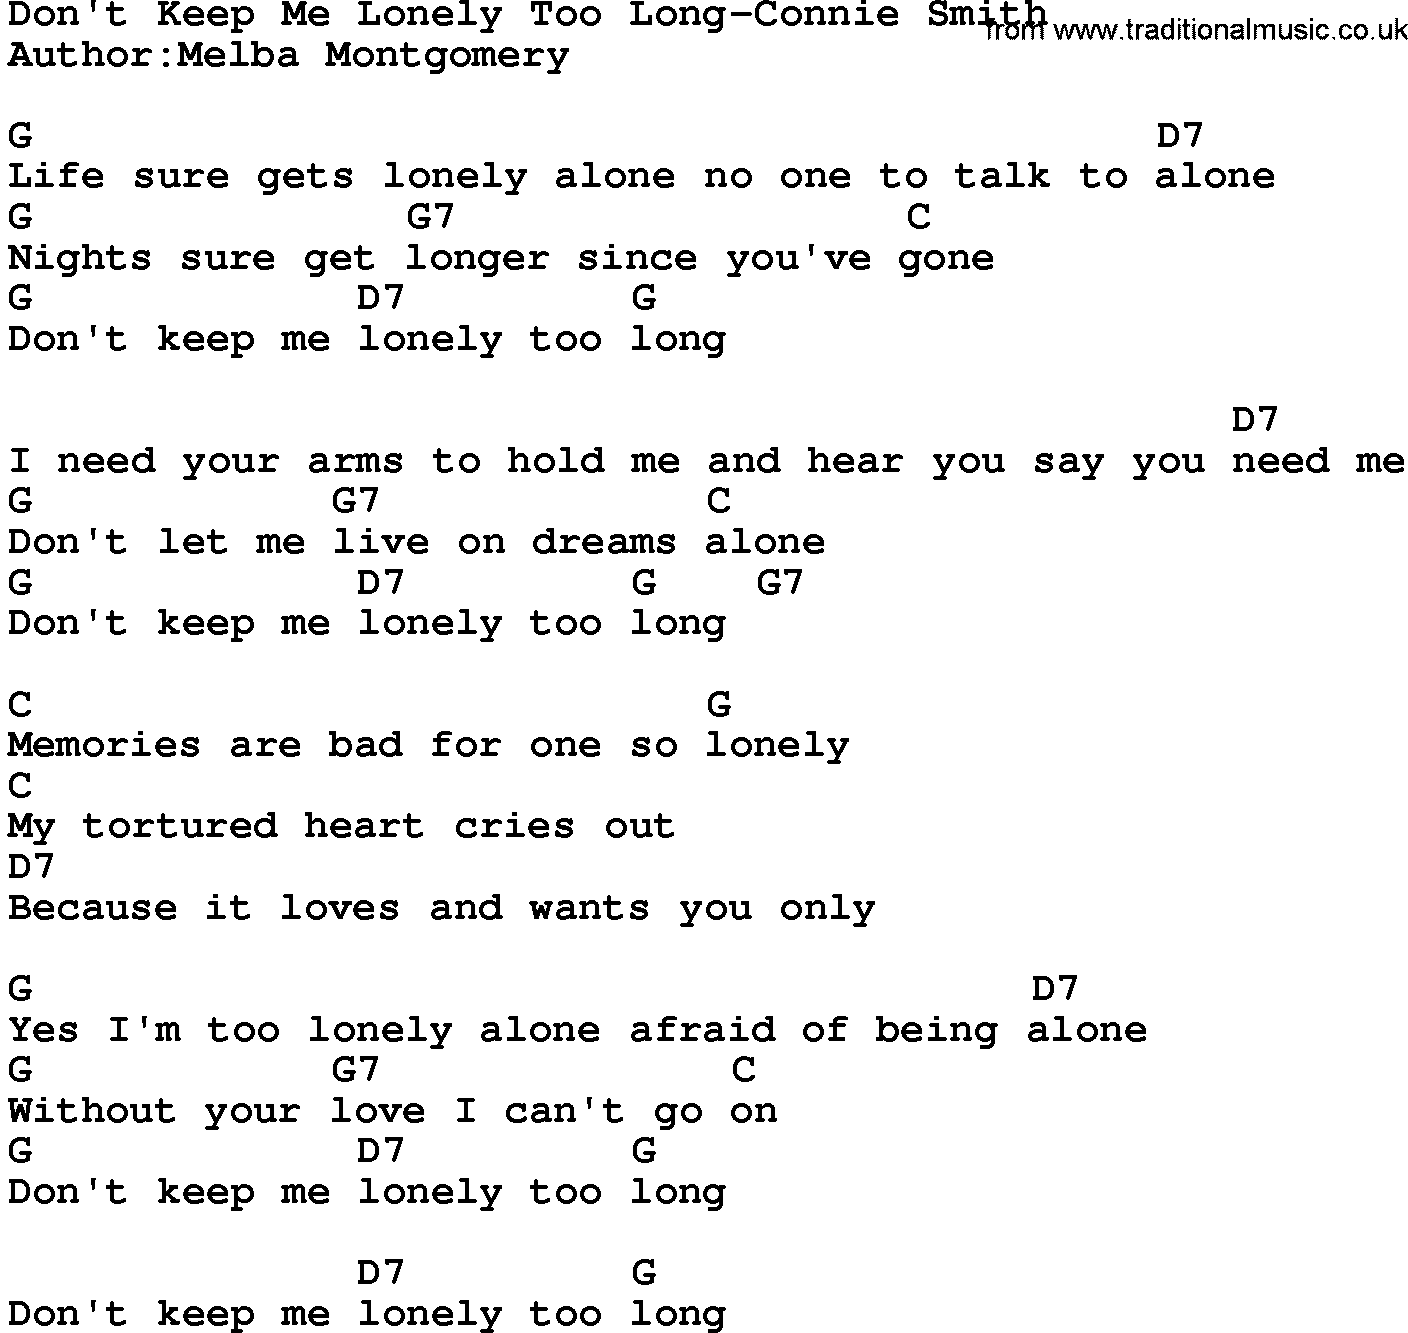 Country music song: Don't Keep Me Lonely Too Long-Connie Smith lyrics and chords